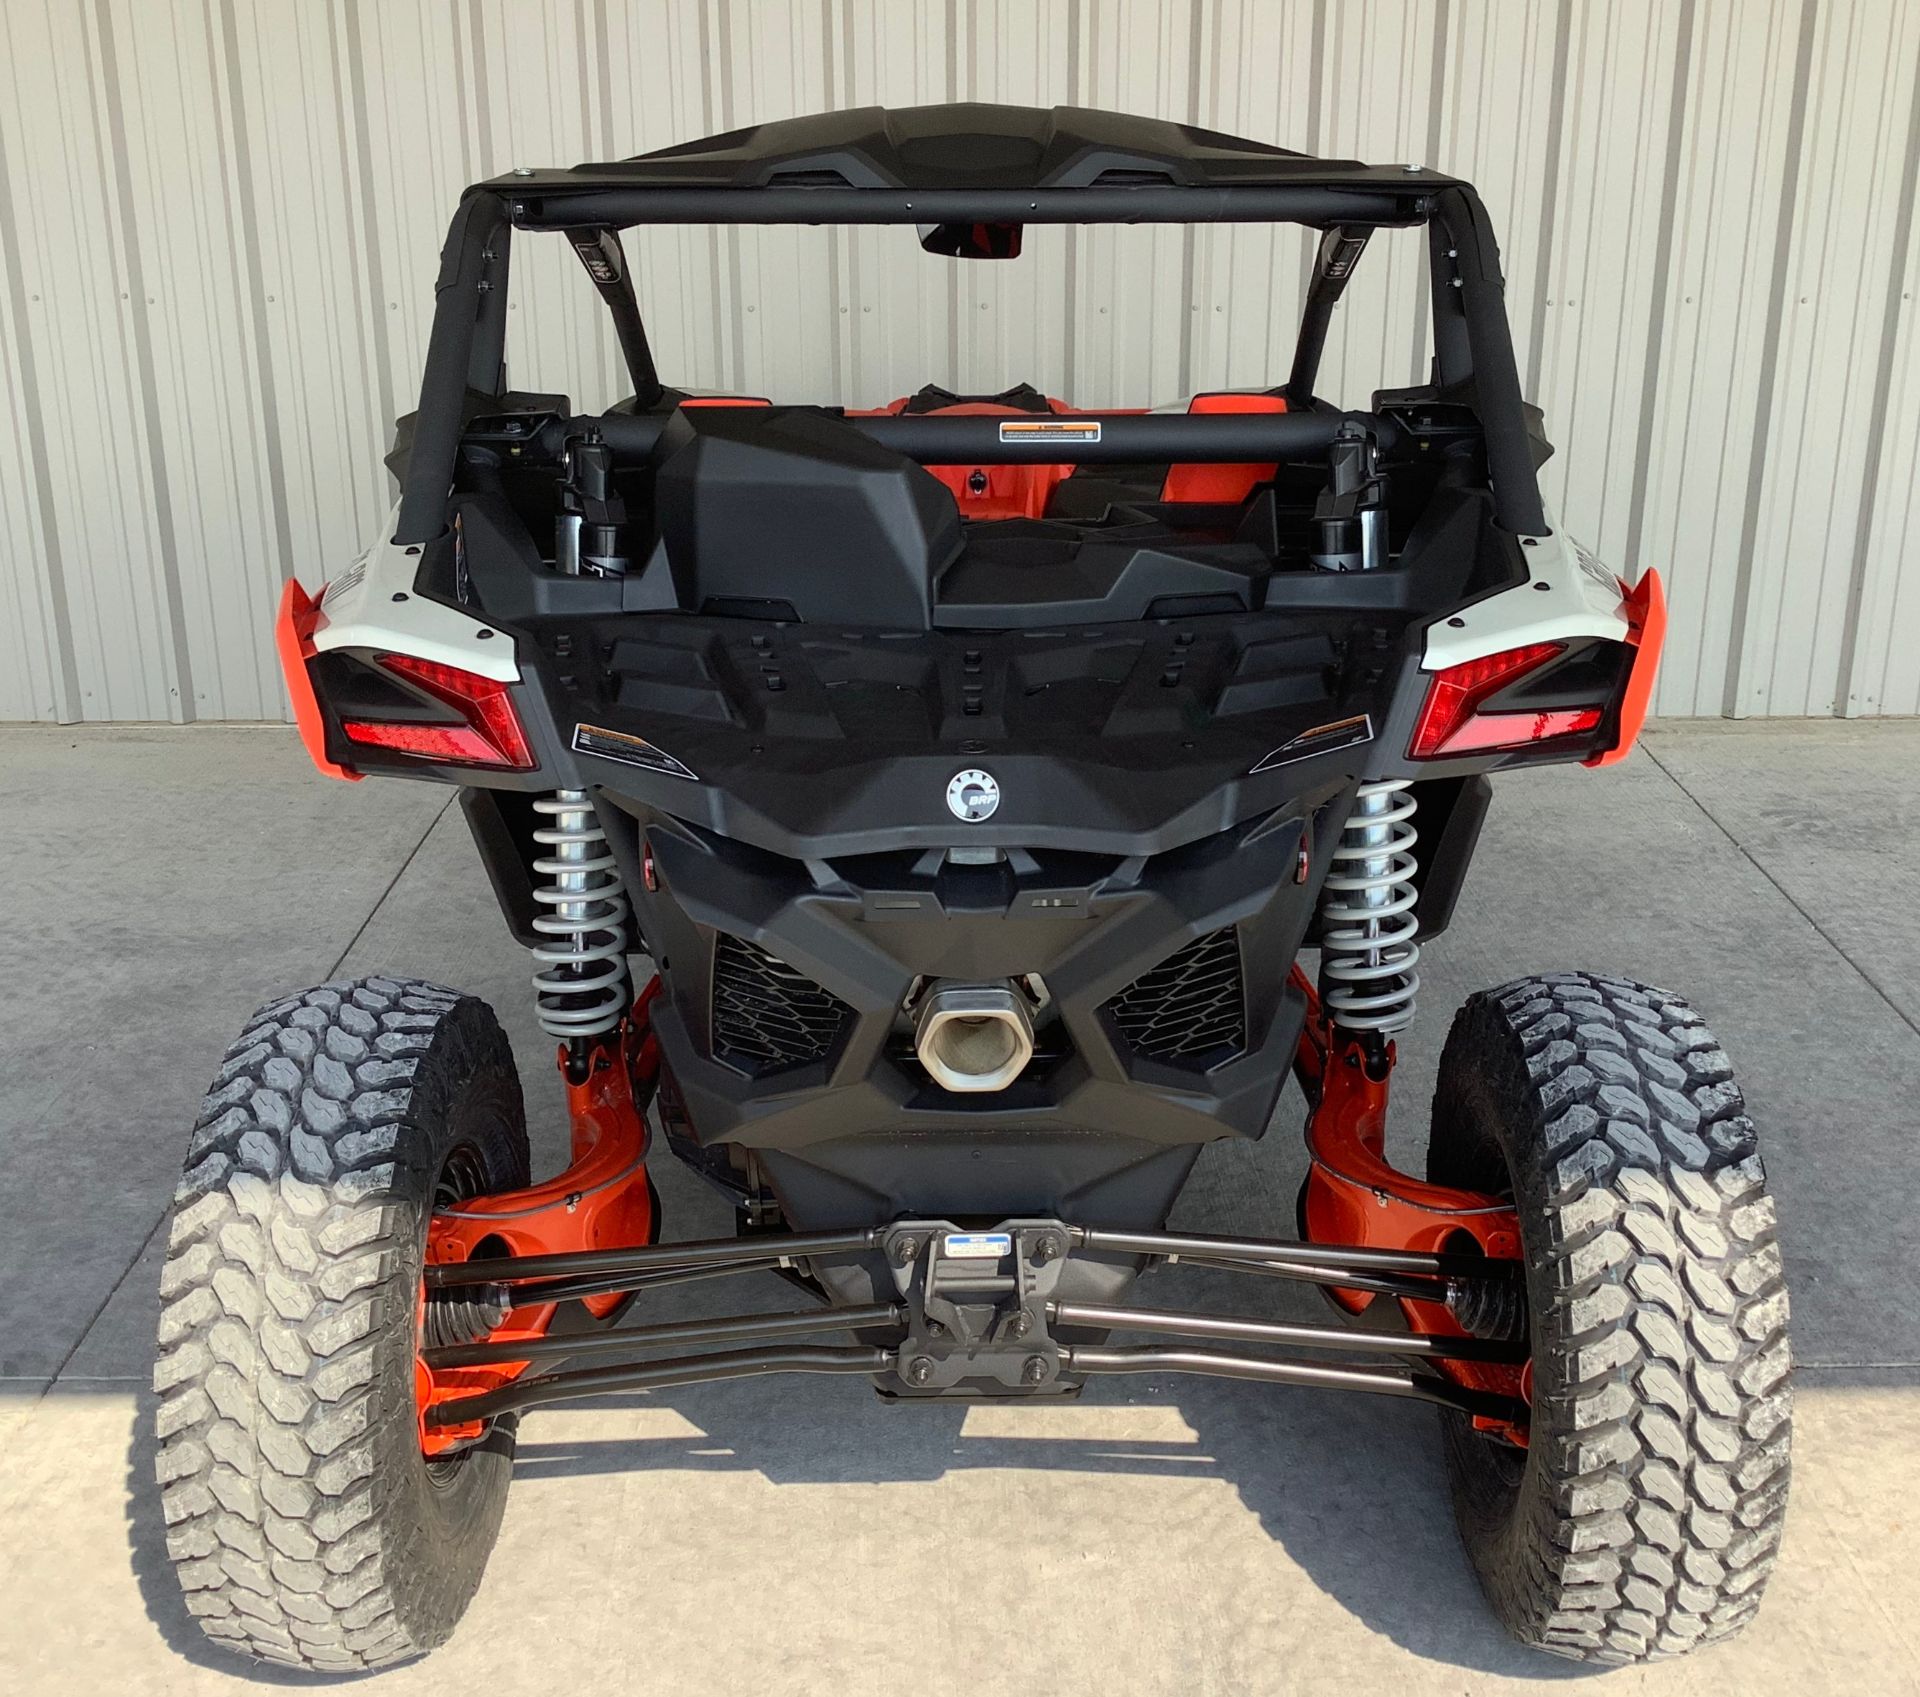 2021 Can-Am Maverick X3 X RC Turbo in Gainesville, Texas - Photo 8